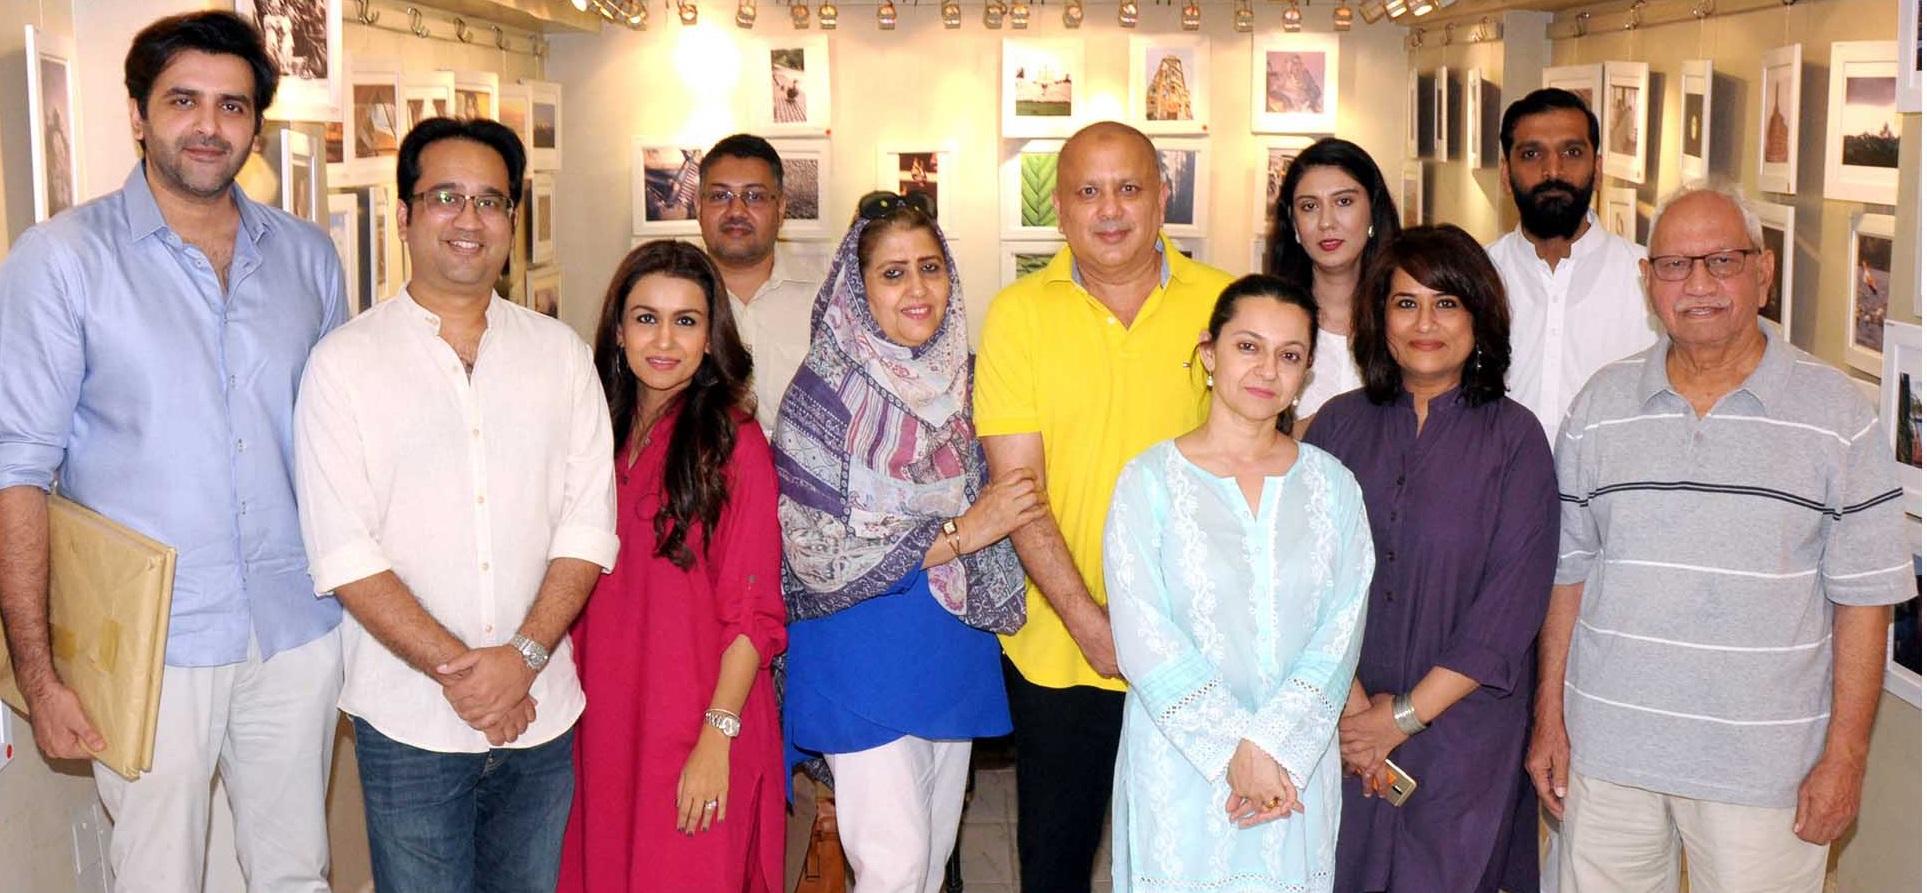 Latif Kapadia Memorial Welfare Trust holds Framed Photo Exhibition for the Cause in Collaboration with Aaj Ka Random & New Louvre Art Gallery to support